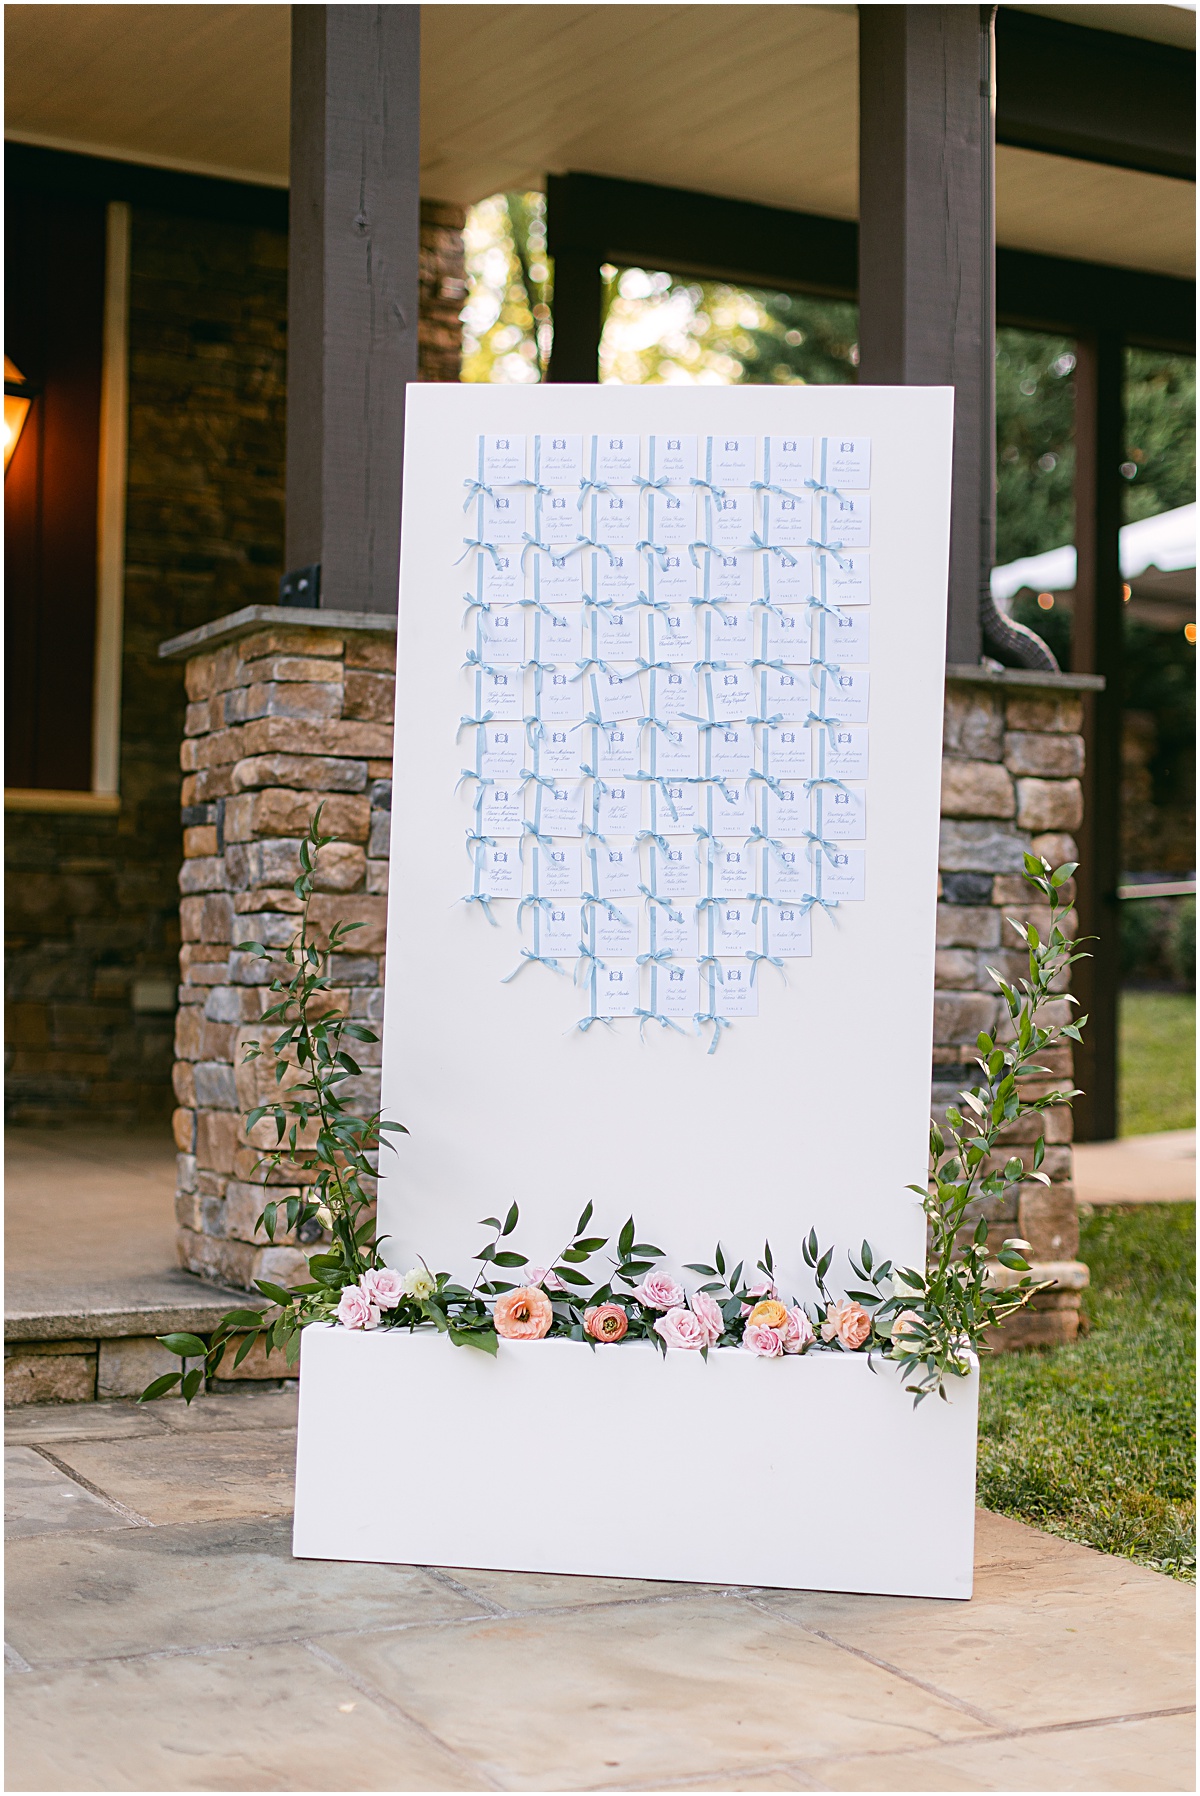 Seating Chart. Joyful summer wedding at the Inn at Willow Grove by Sarah Bradshaw. Planning by Kelley Cannon Events.